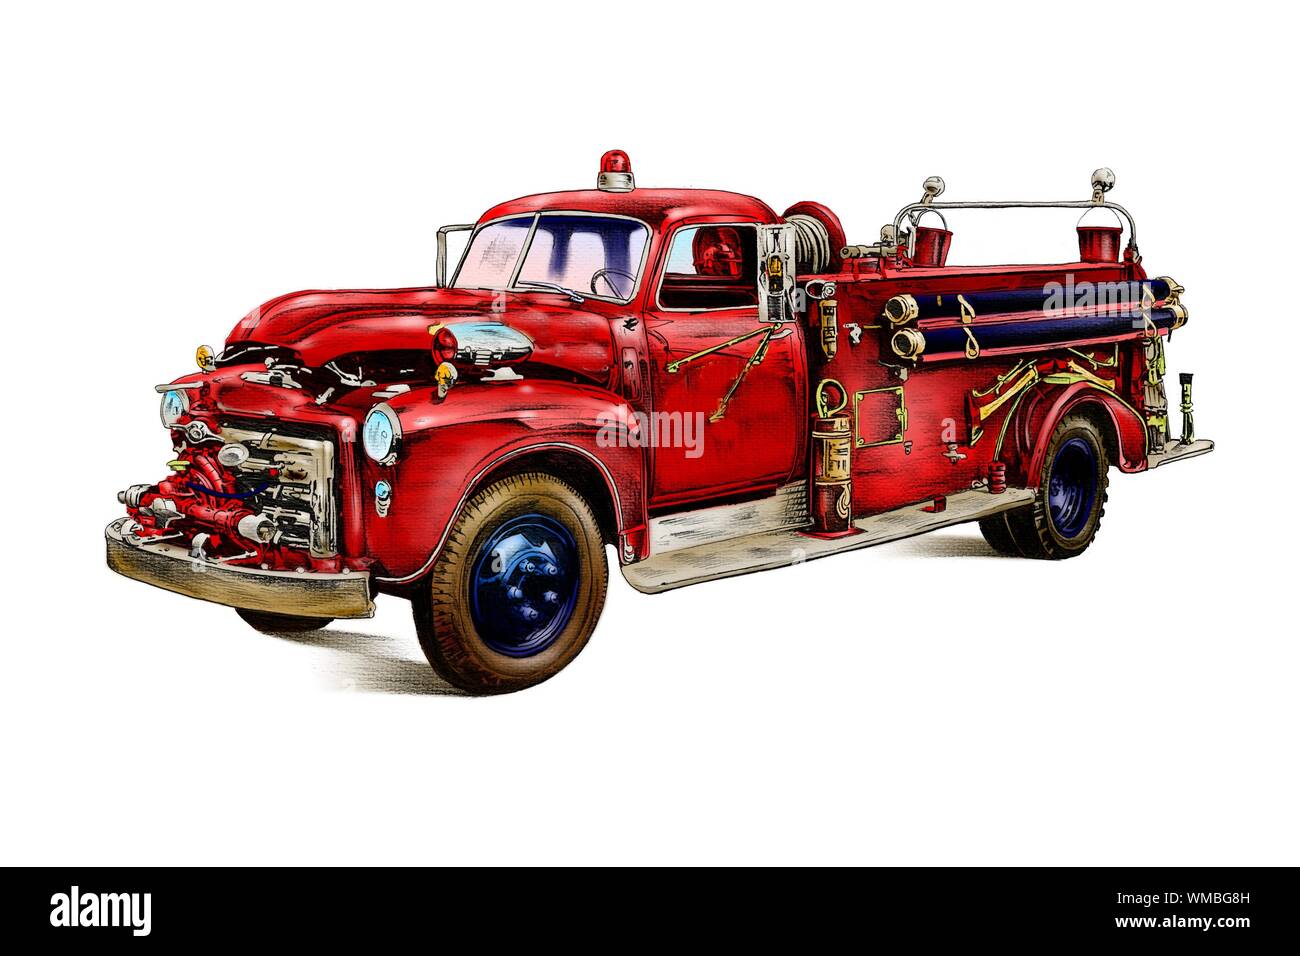 fire truck old classic car retro vintage Stock Photo - Alamy